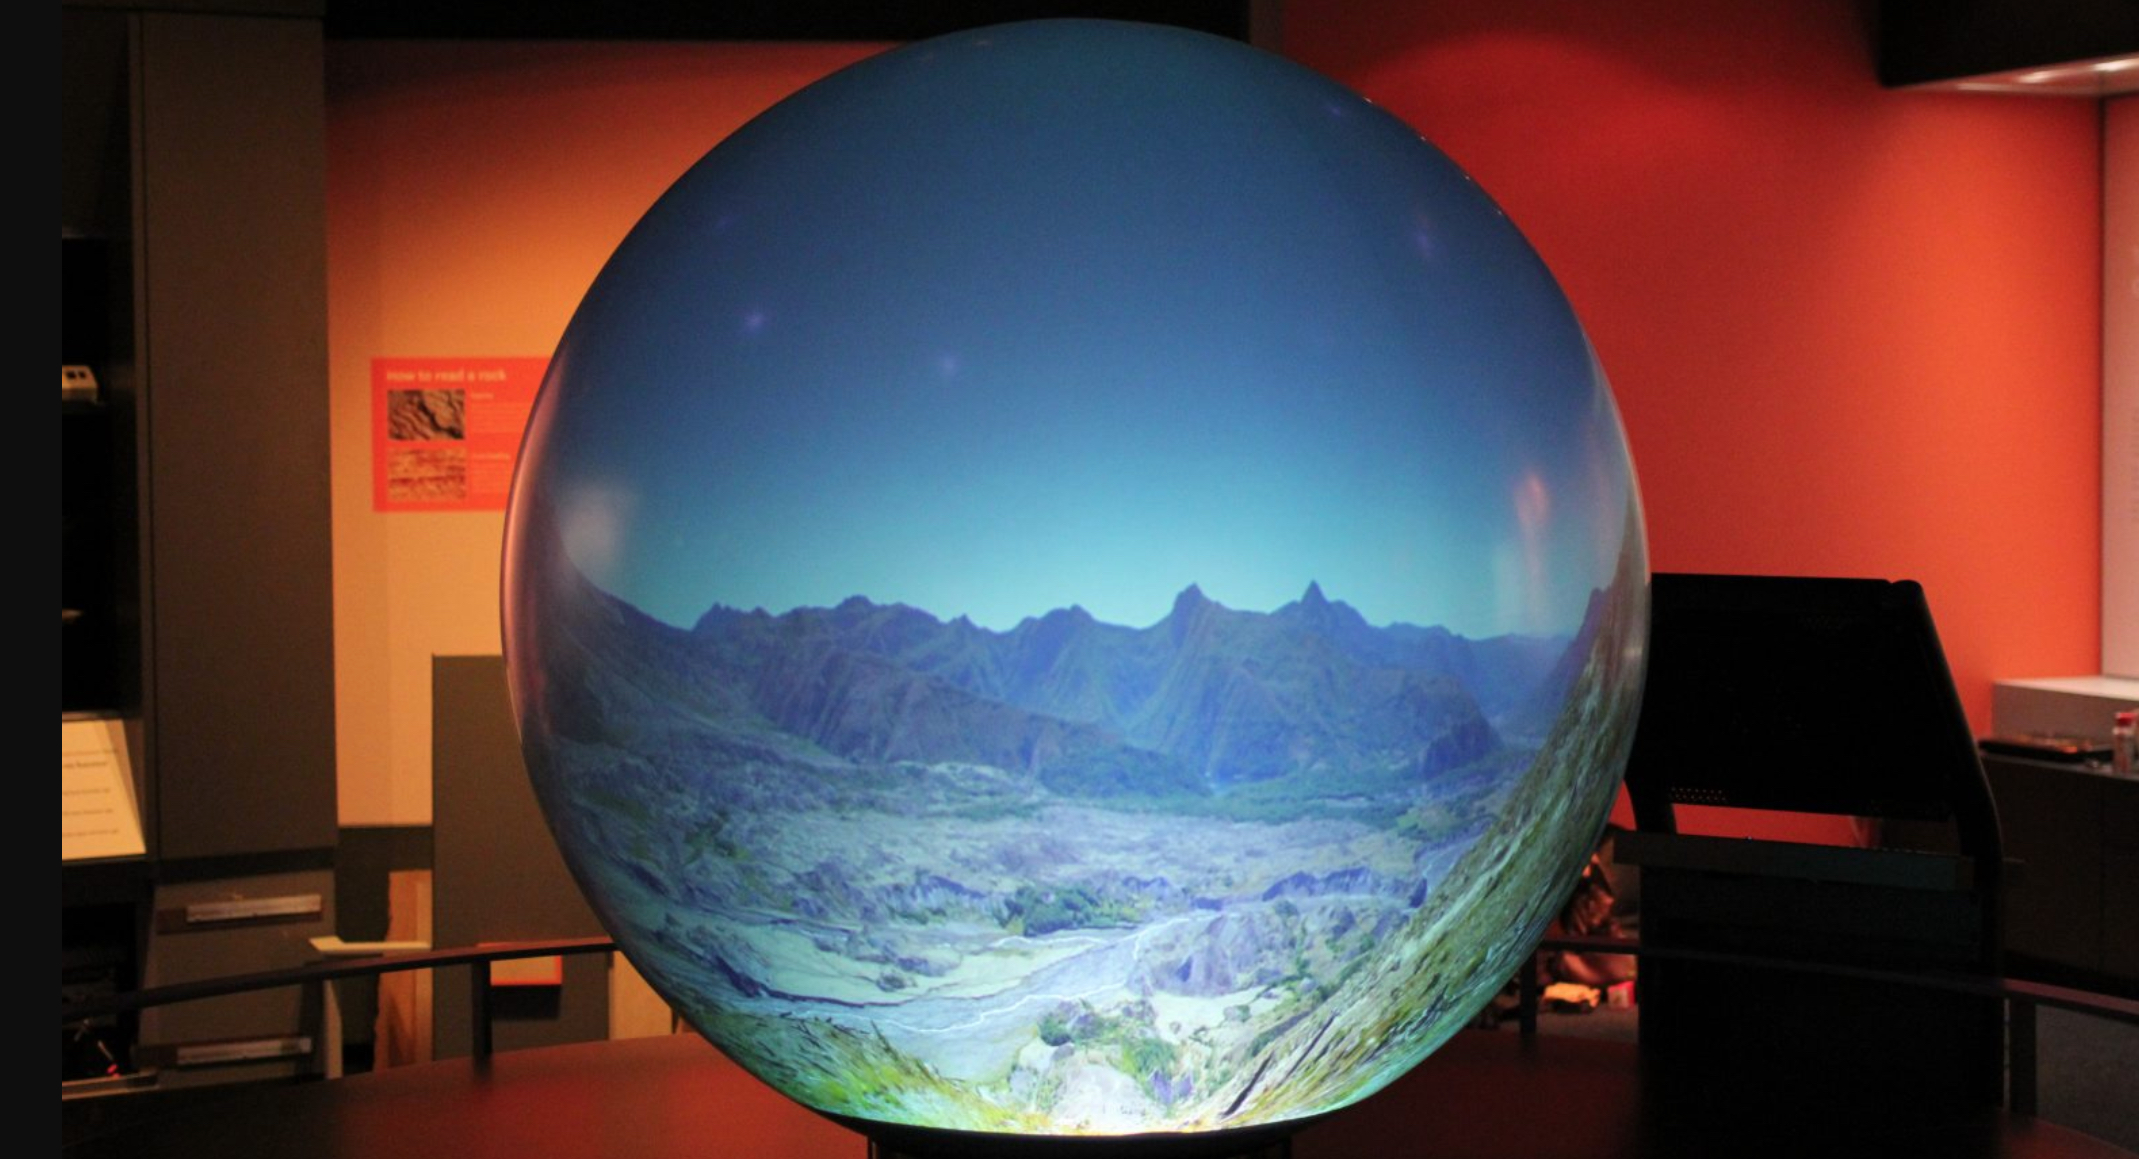 Image of a working Magic Planet device showing a mountain landscape photograph